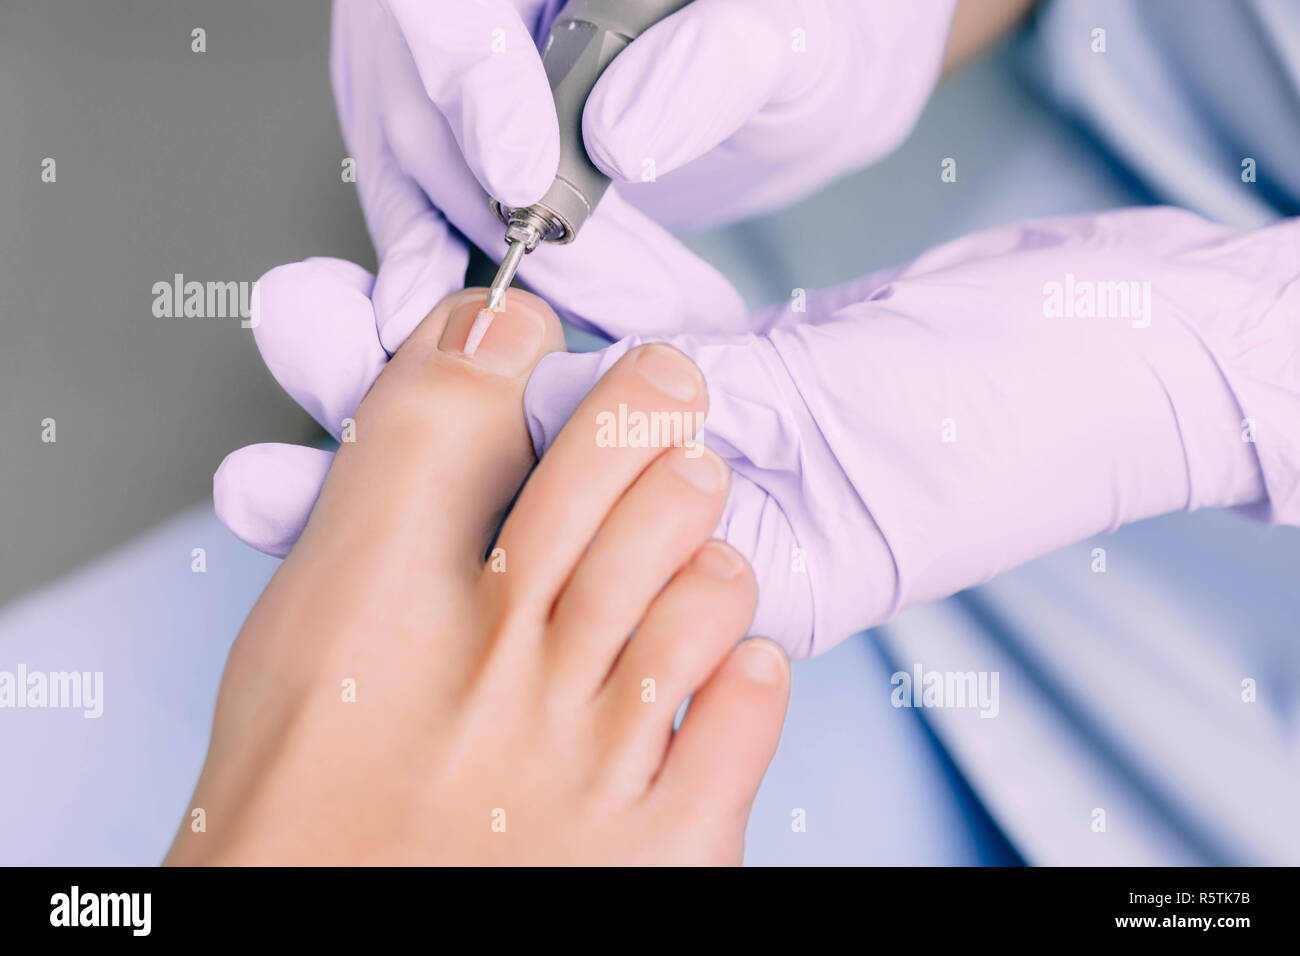 Chiropodist treating a patient's foot, pedicure treatment Stock Photo